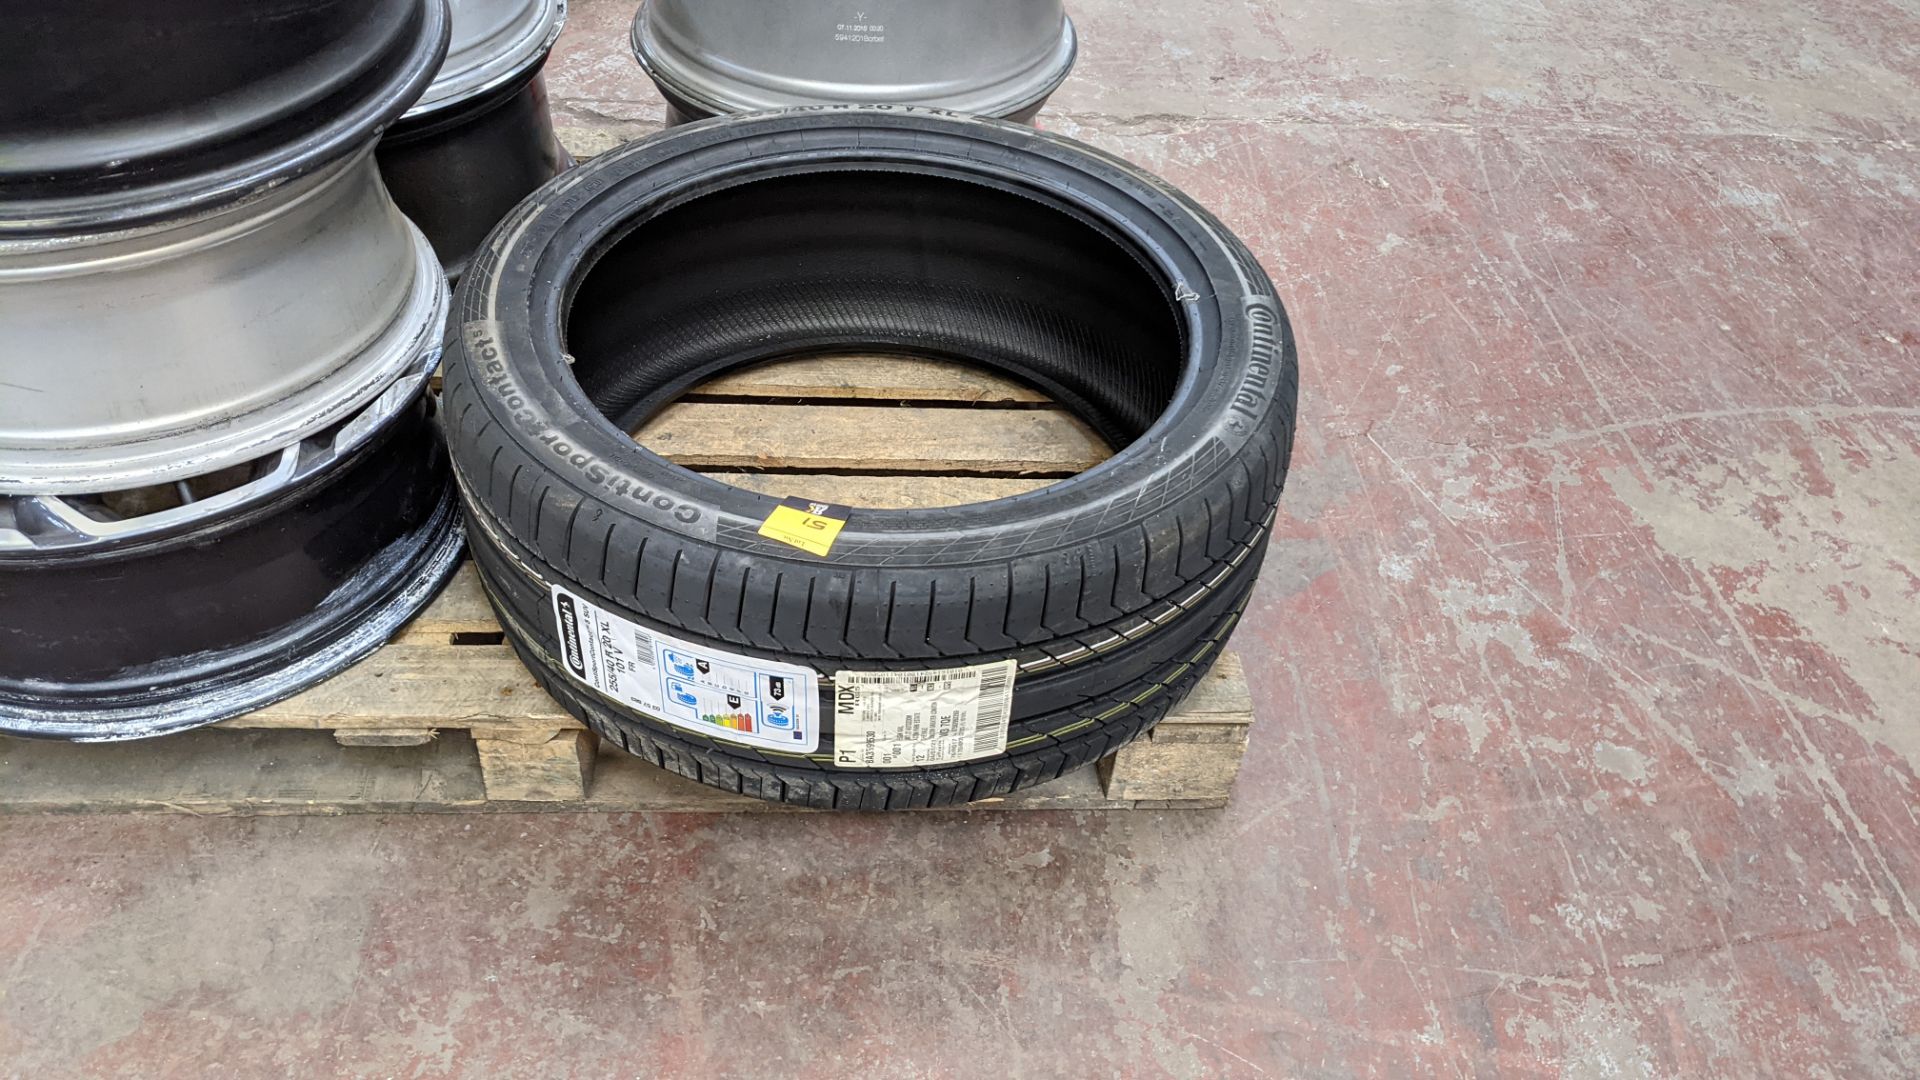 Continental Sport Contact 5 SUV tyre, appears to be new & unused, size 255/40 R 20XL 101V